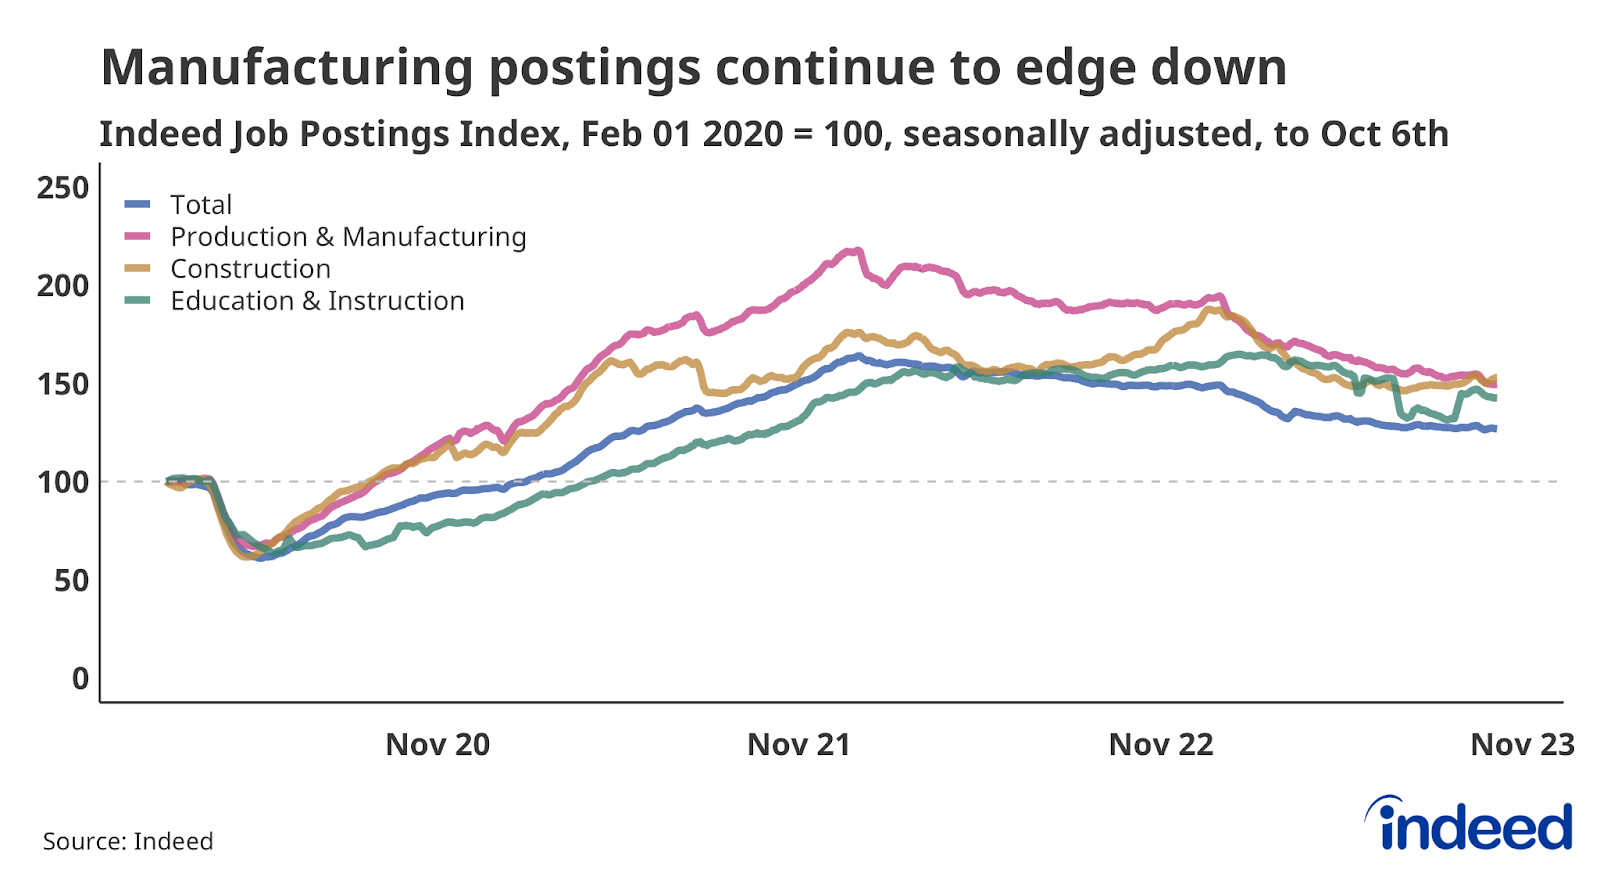 Line chart titled "Manufacturing postings continue to edge down," shows job postings in Production & Manufacturing, Construction, and Education & Instruction to October 6, 2023. All categories are down over the past year. 